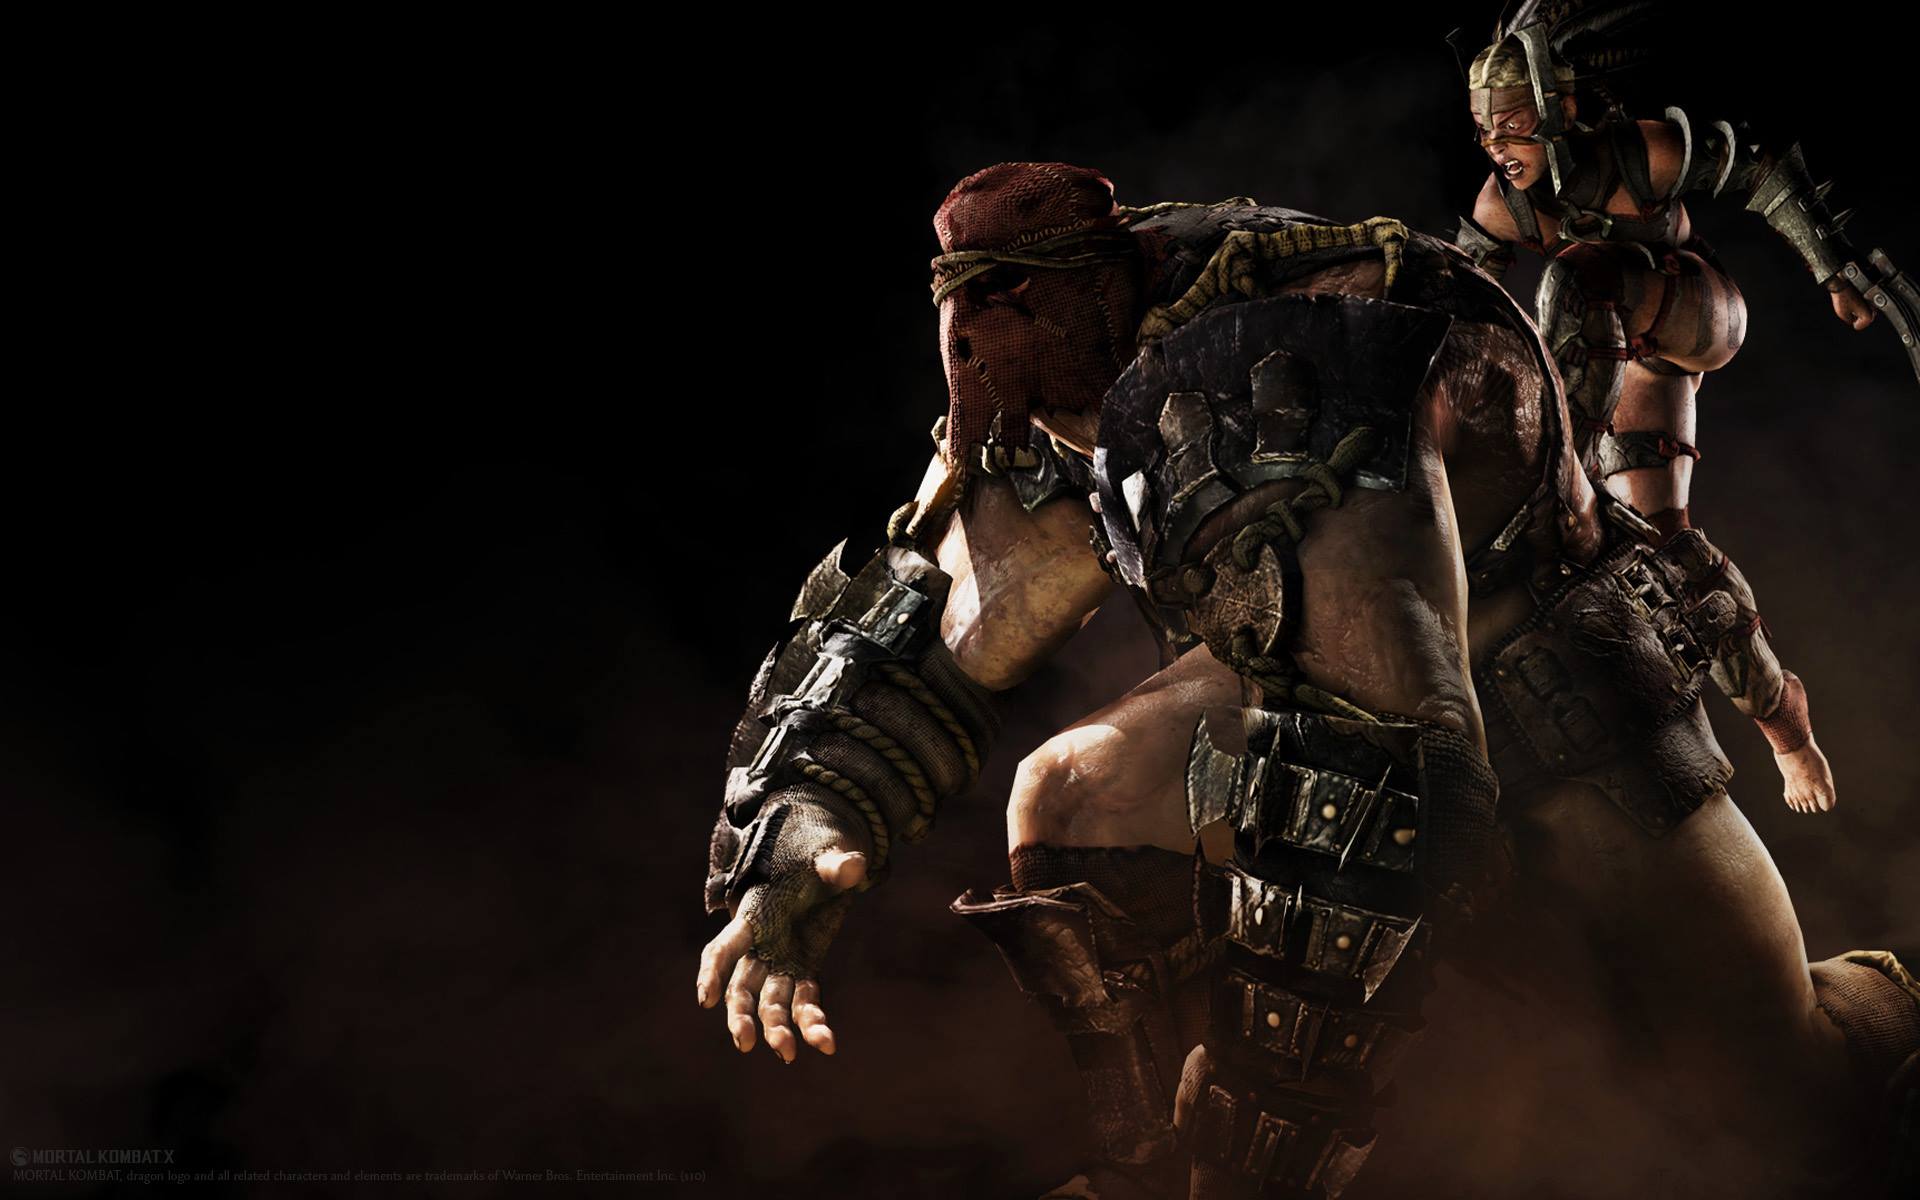 Have A Closer Look At The New Characters In Mortal Kombat 